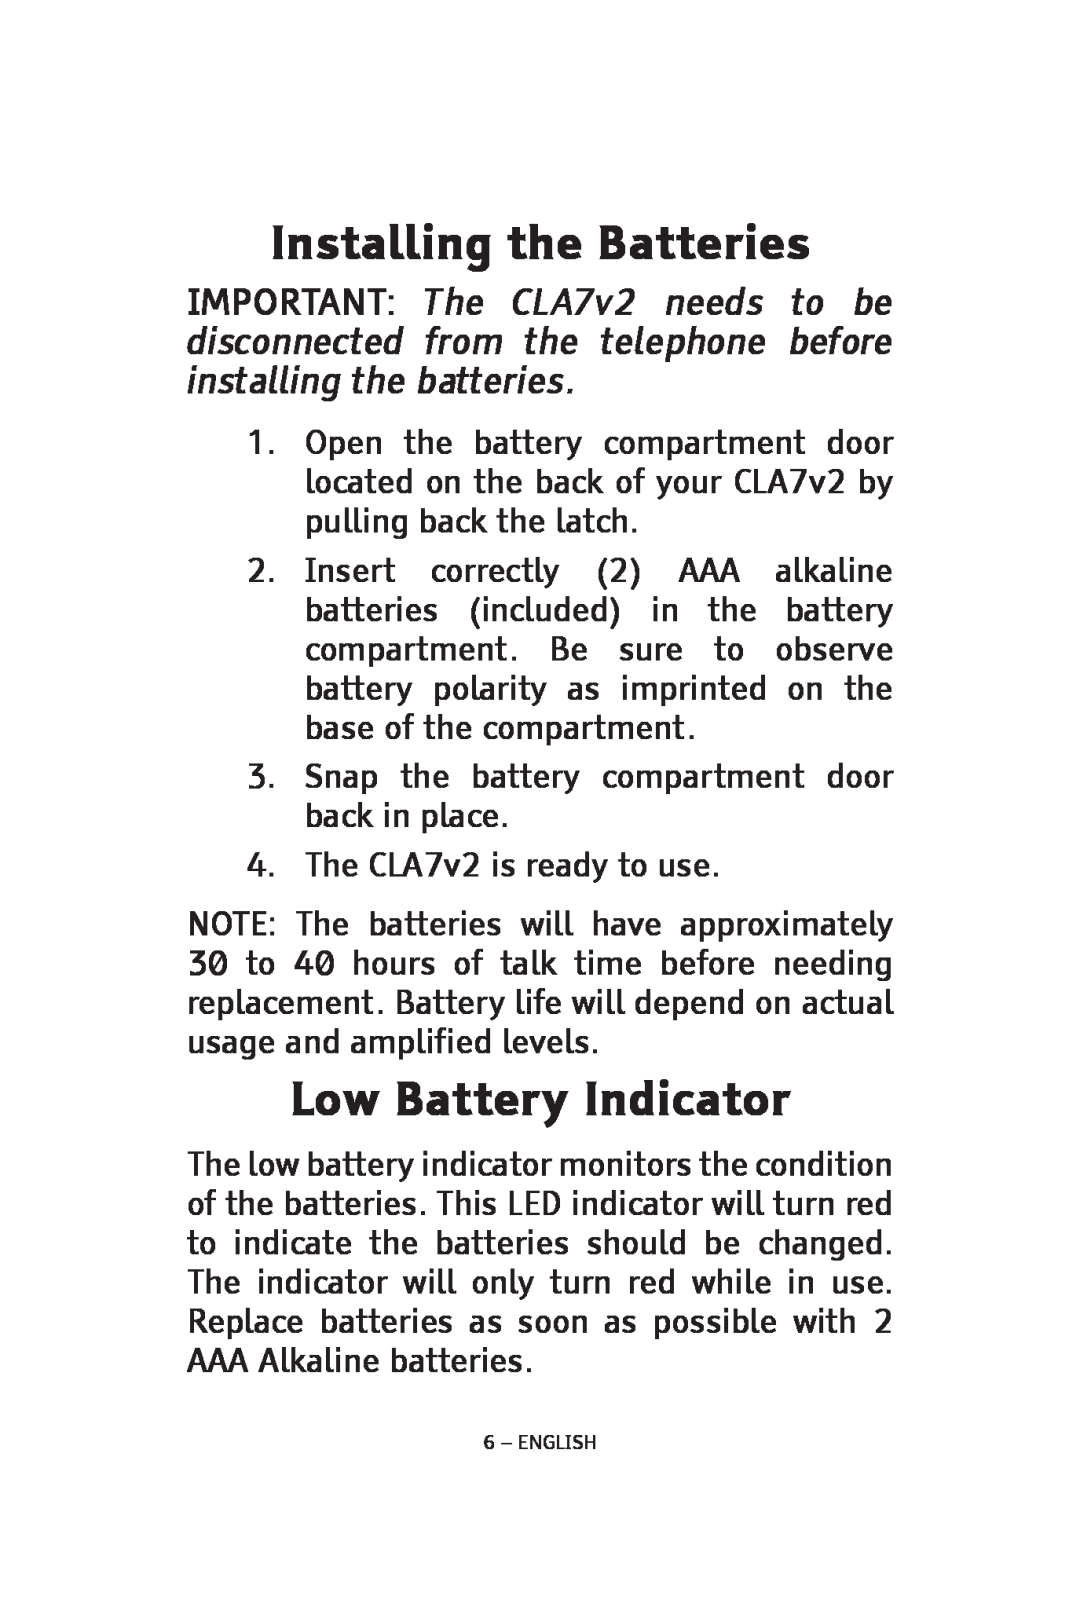 ClearSounds CLA7V2 manual Installing the Batteries, Low Battery Indicator 